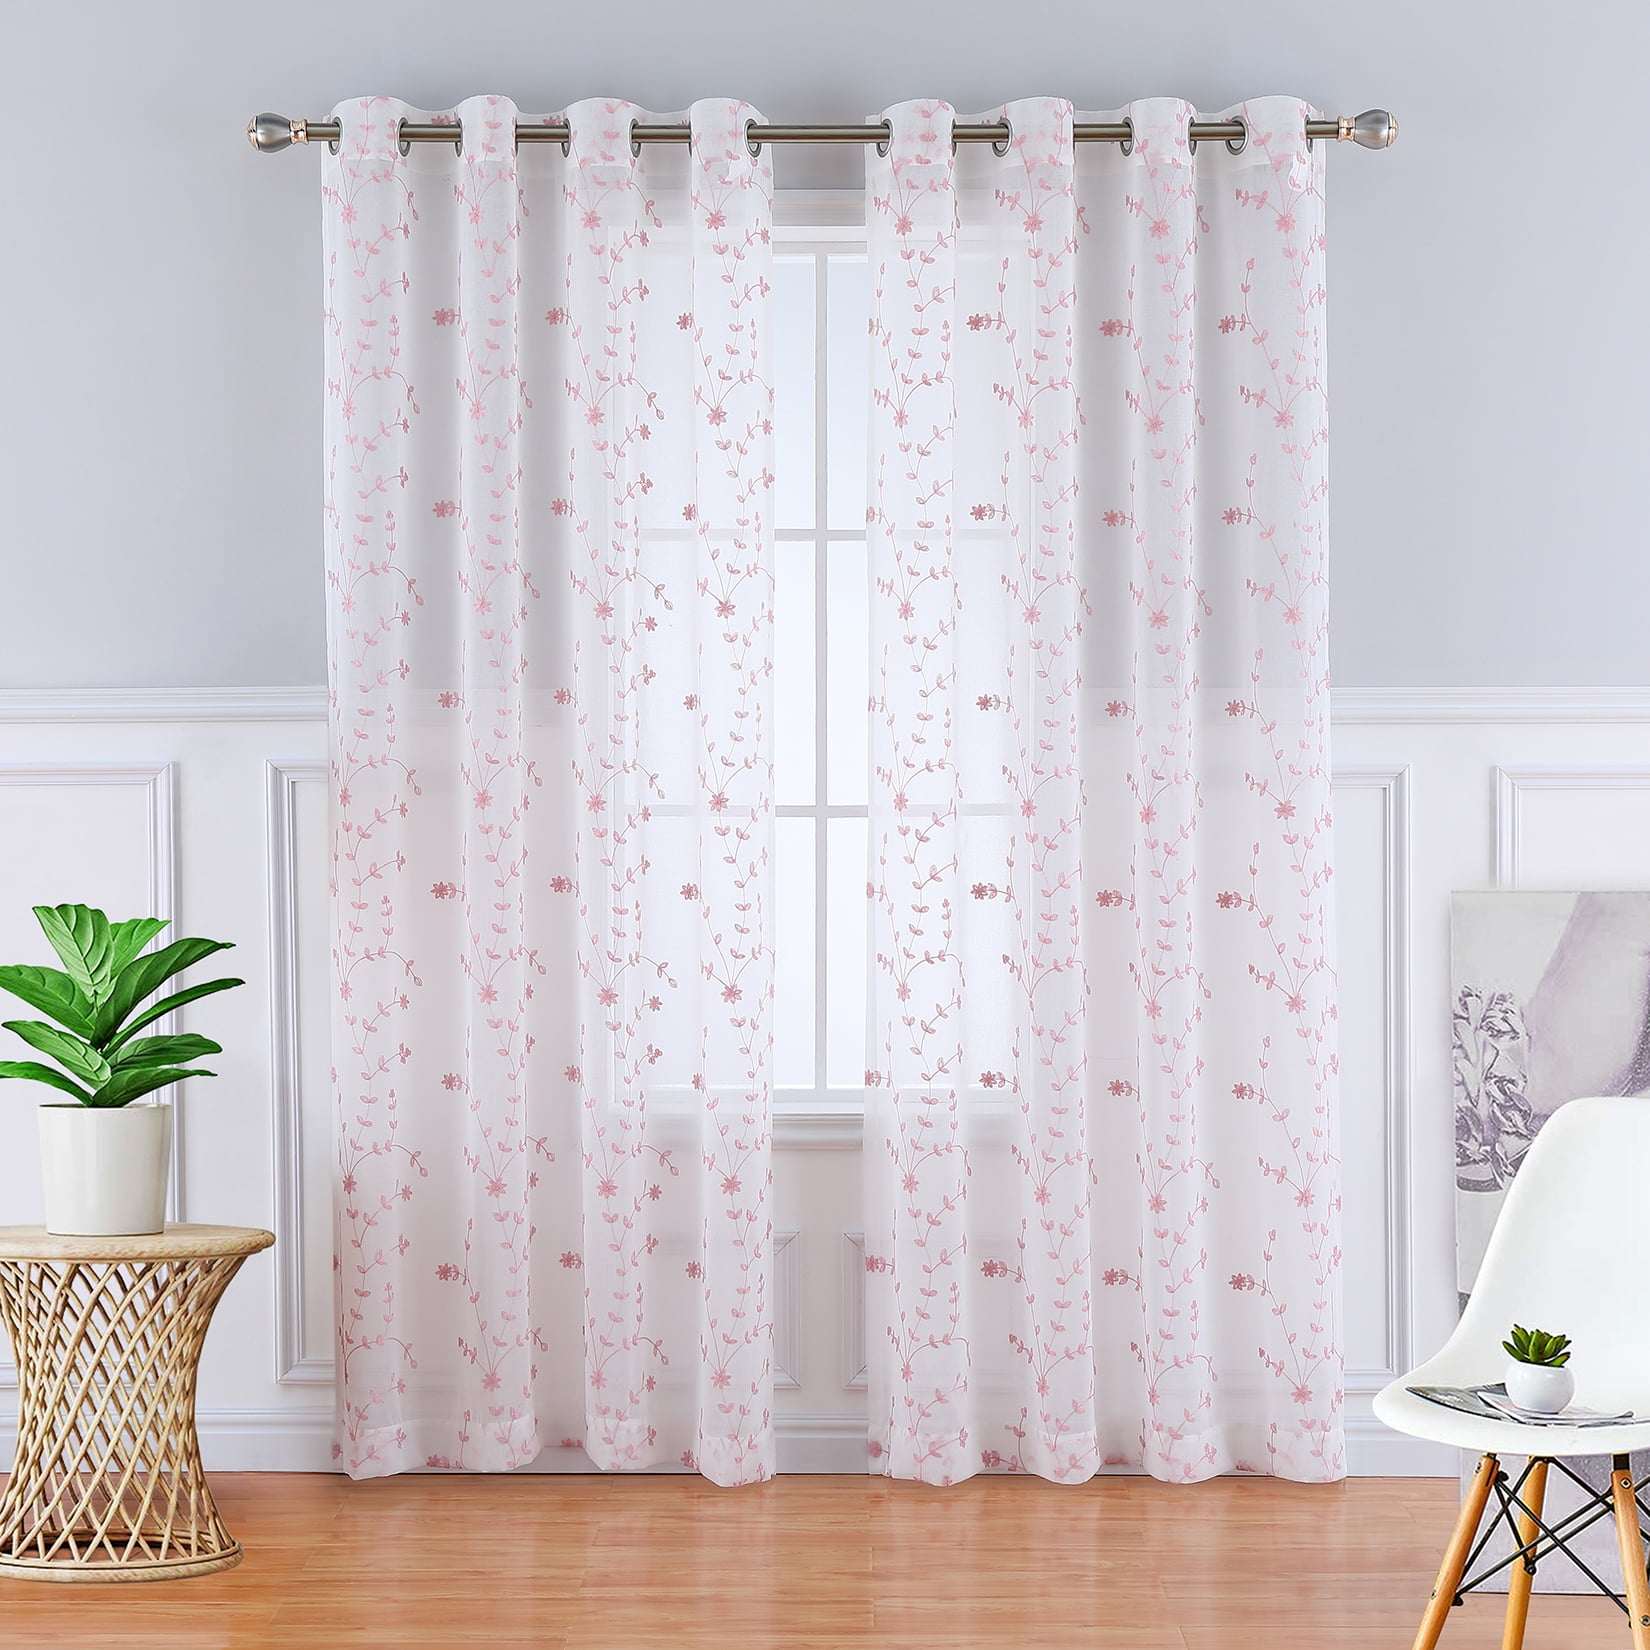 Rod Pocket Sheer Voile Window Treatments Curtain LoyoLady White Floral Sheer Curtains 90 Inches Long Embroidery Sheer Valances for Sliding Glass Door Set of 2 Panels 90 W x 90 L 